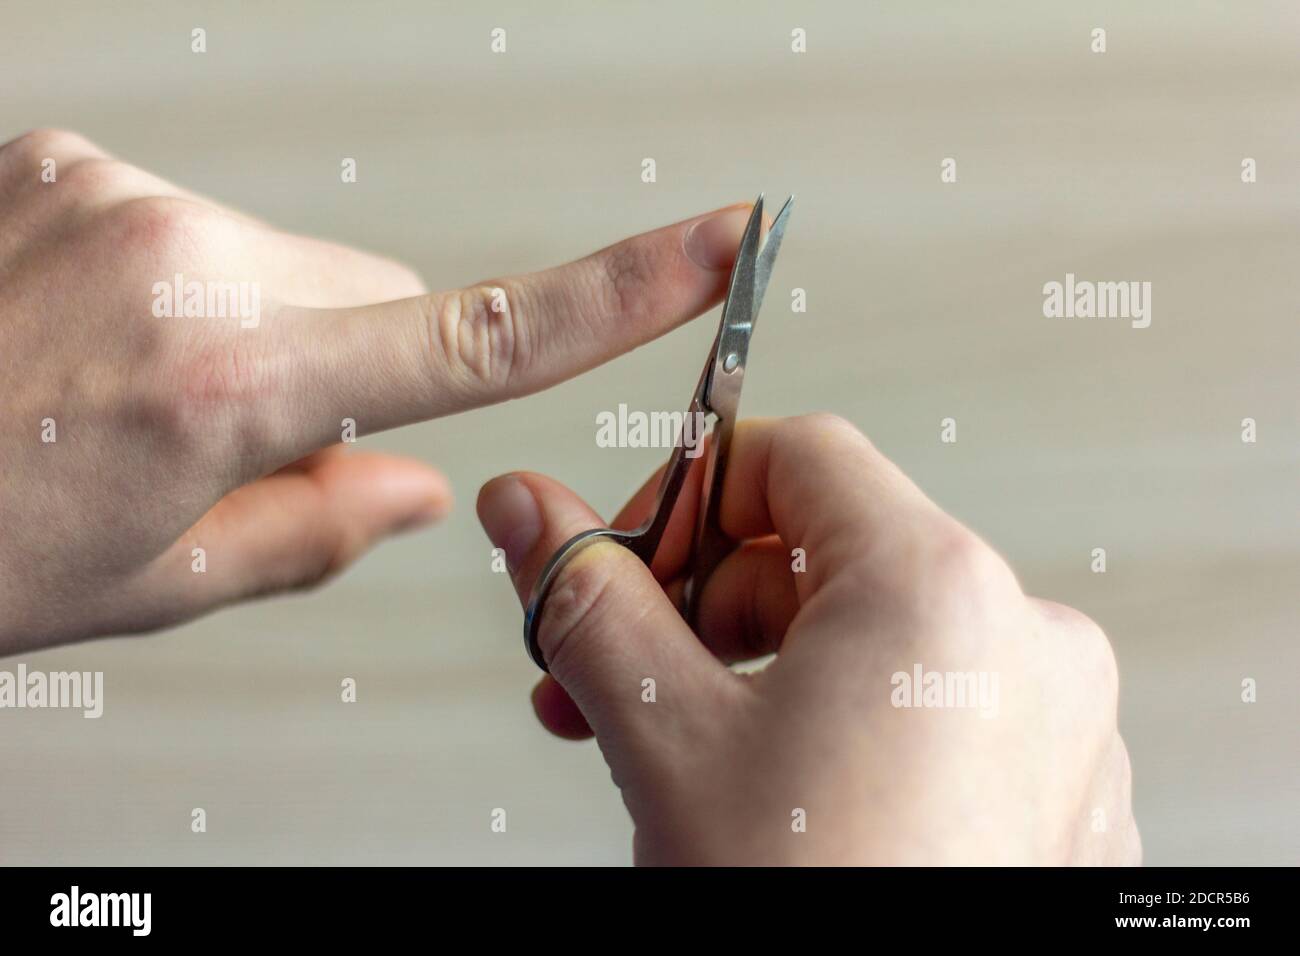 Cut your nails. A young man cuts his nails with nail scissors. Taking care  of your appearance and yourself Stock Photo - Alamy